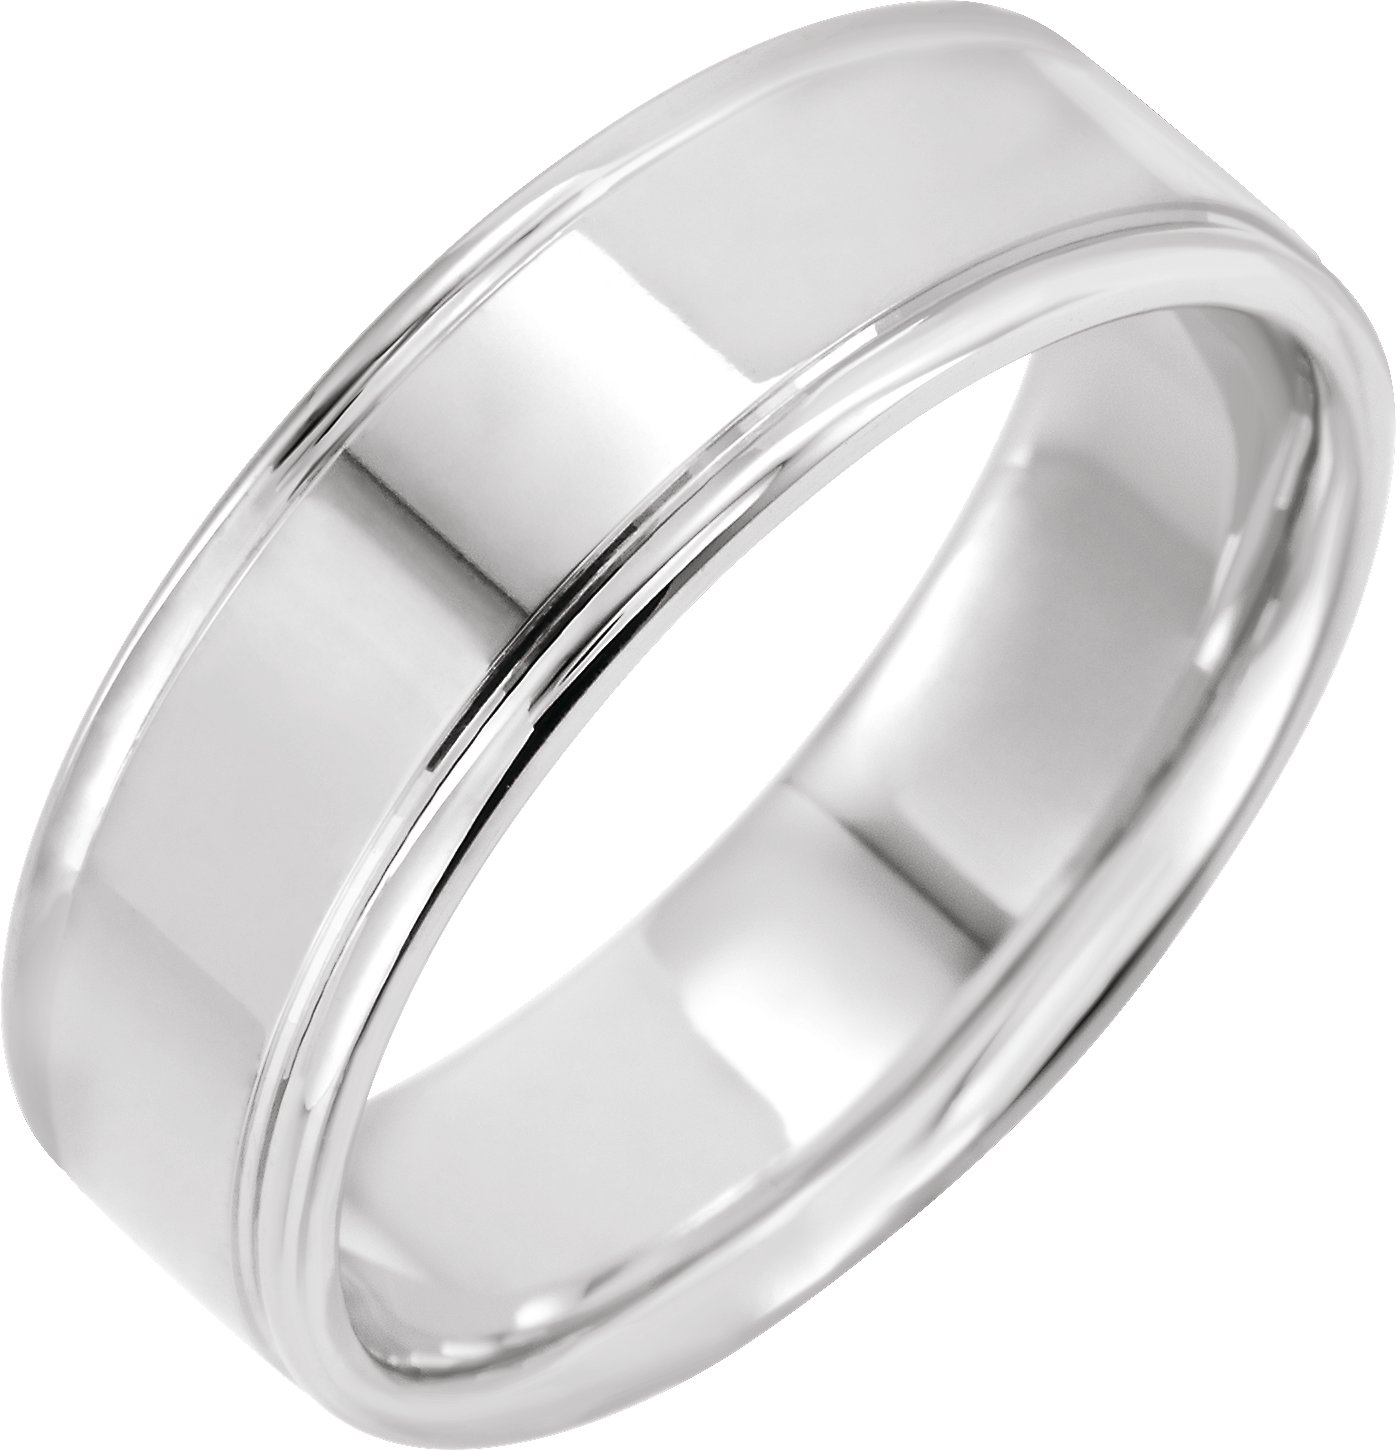 Continuum Sterling Silver 7 mm Grooved Band Size 20 Ref 16344091